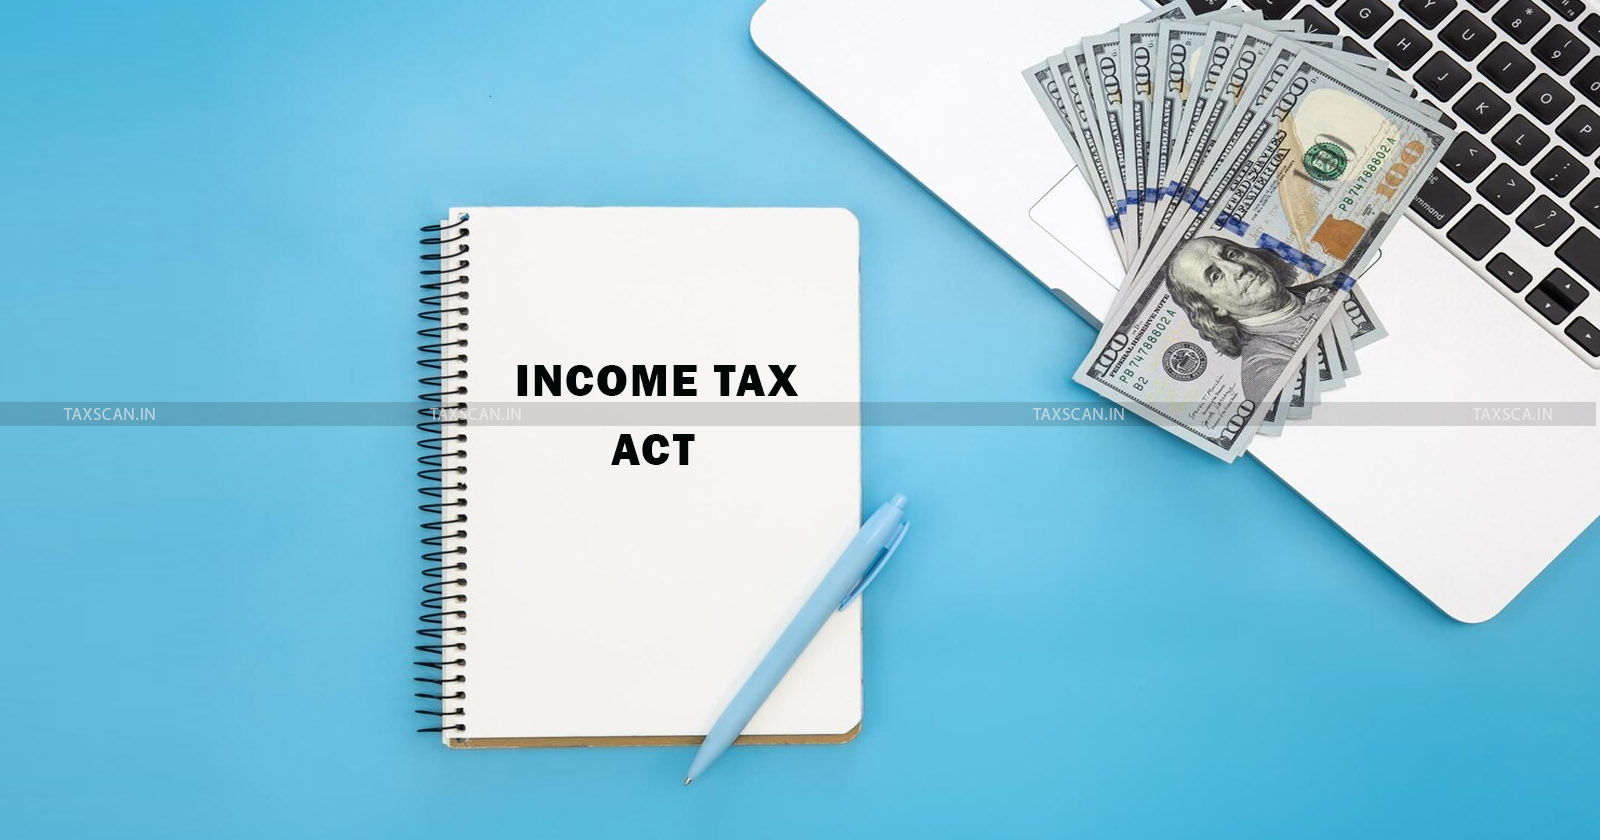 ITAT - AO - book profit - Income Tax Act - opportunity - assessee - taxscan